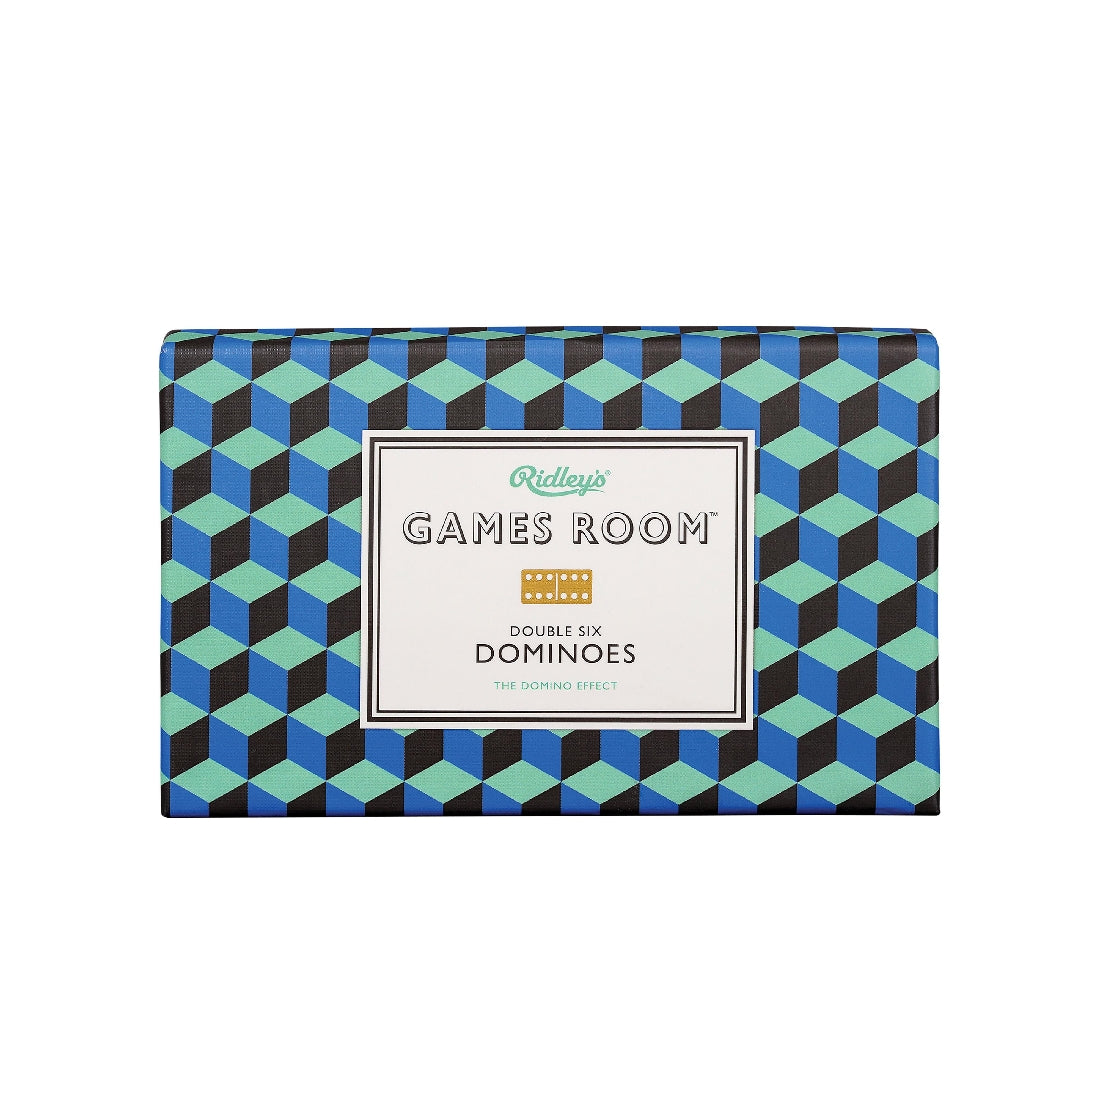 GAMES ROOM - DOUBLE SIX DOMINOS